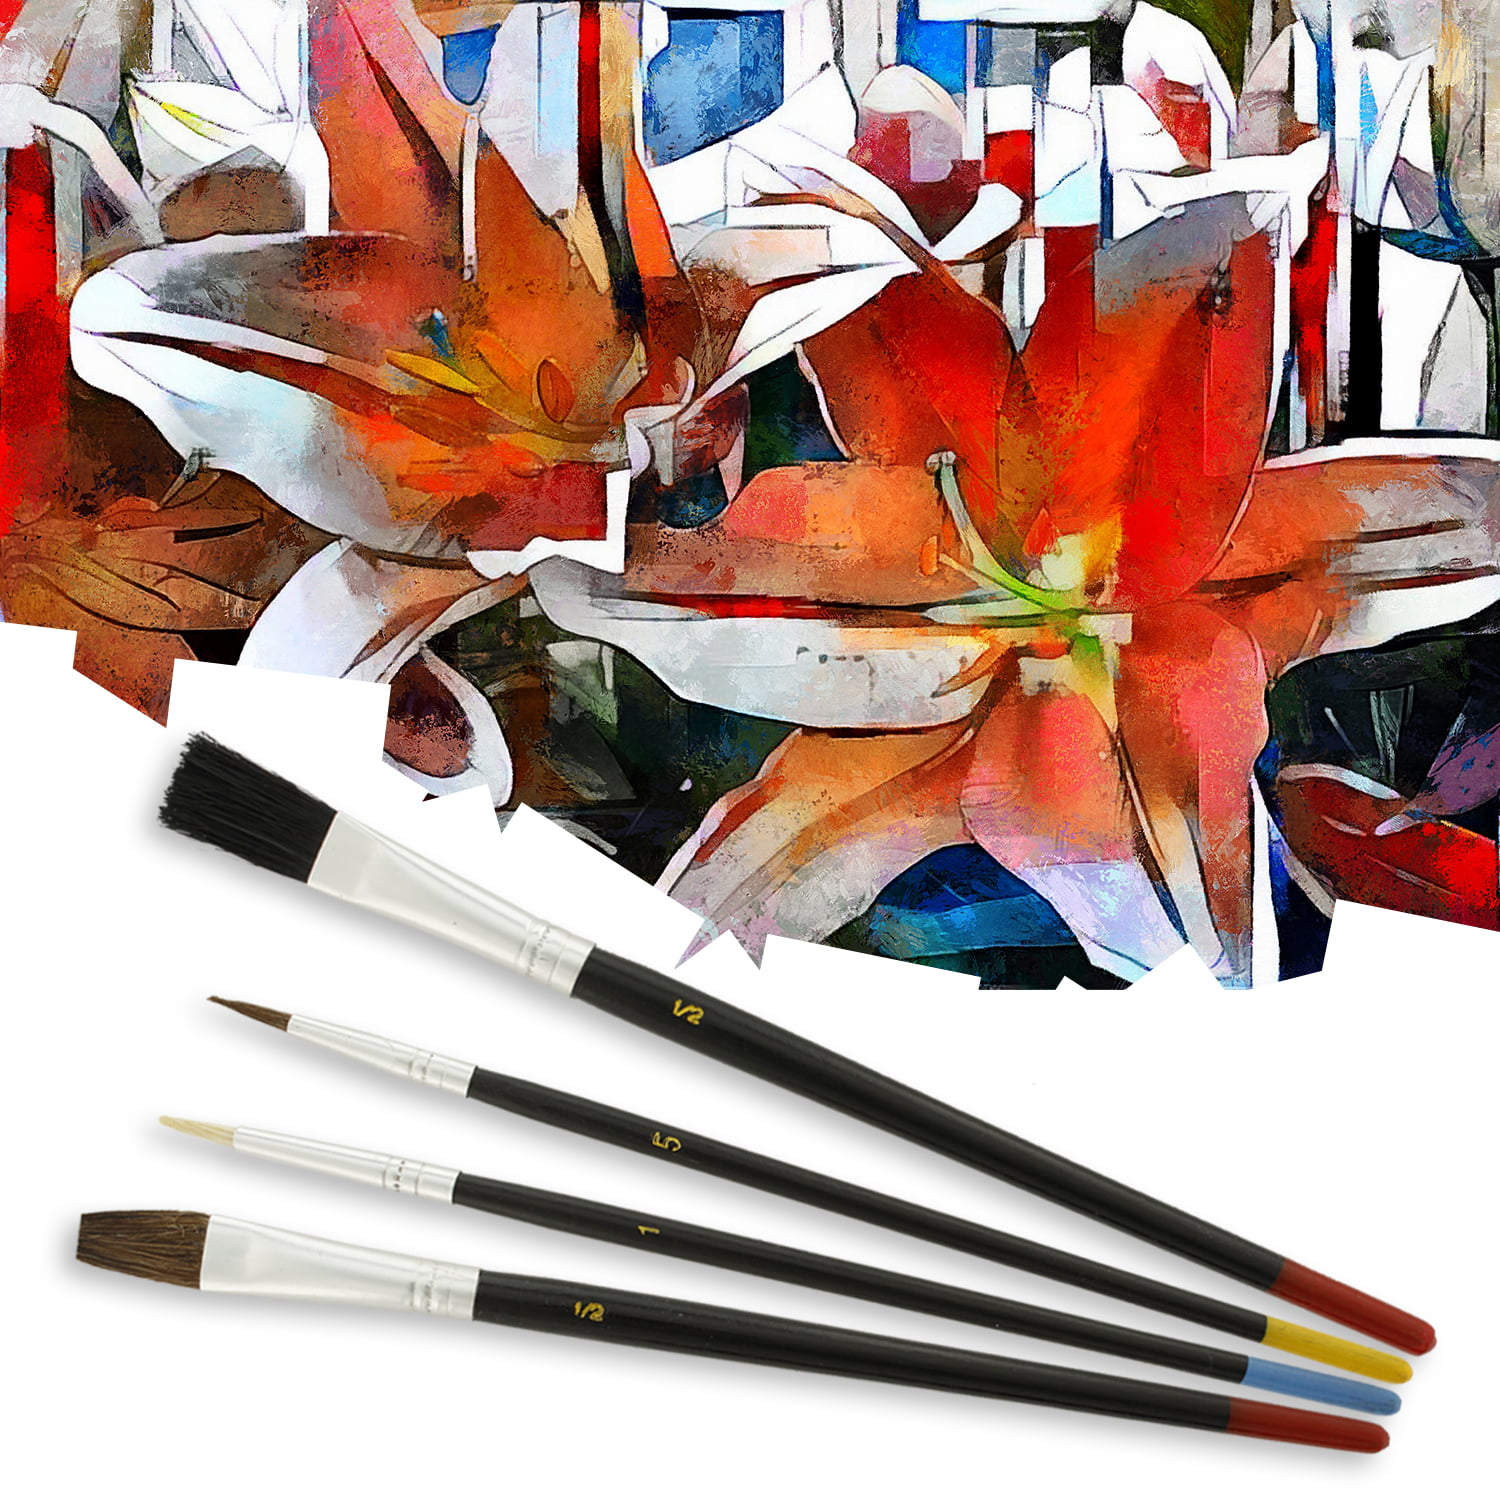 Drawing Supplies. Artists Tools, Brush, Graphic by pch.vector · Creative  Fabrica